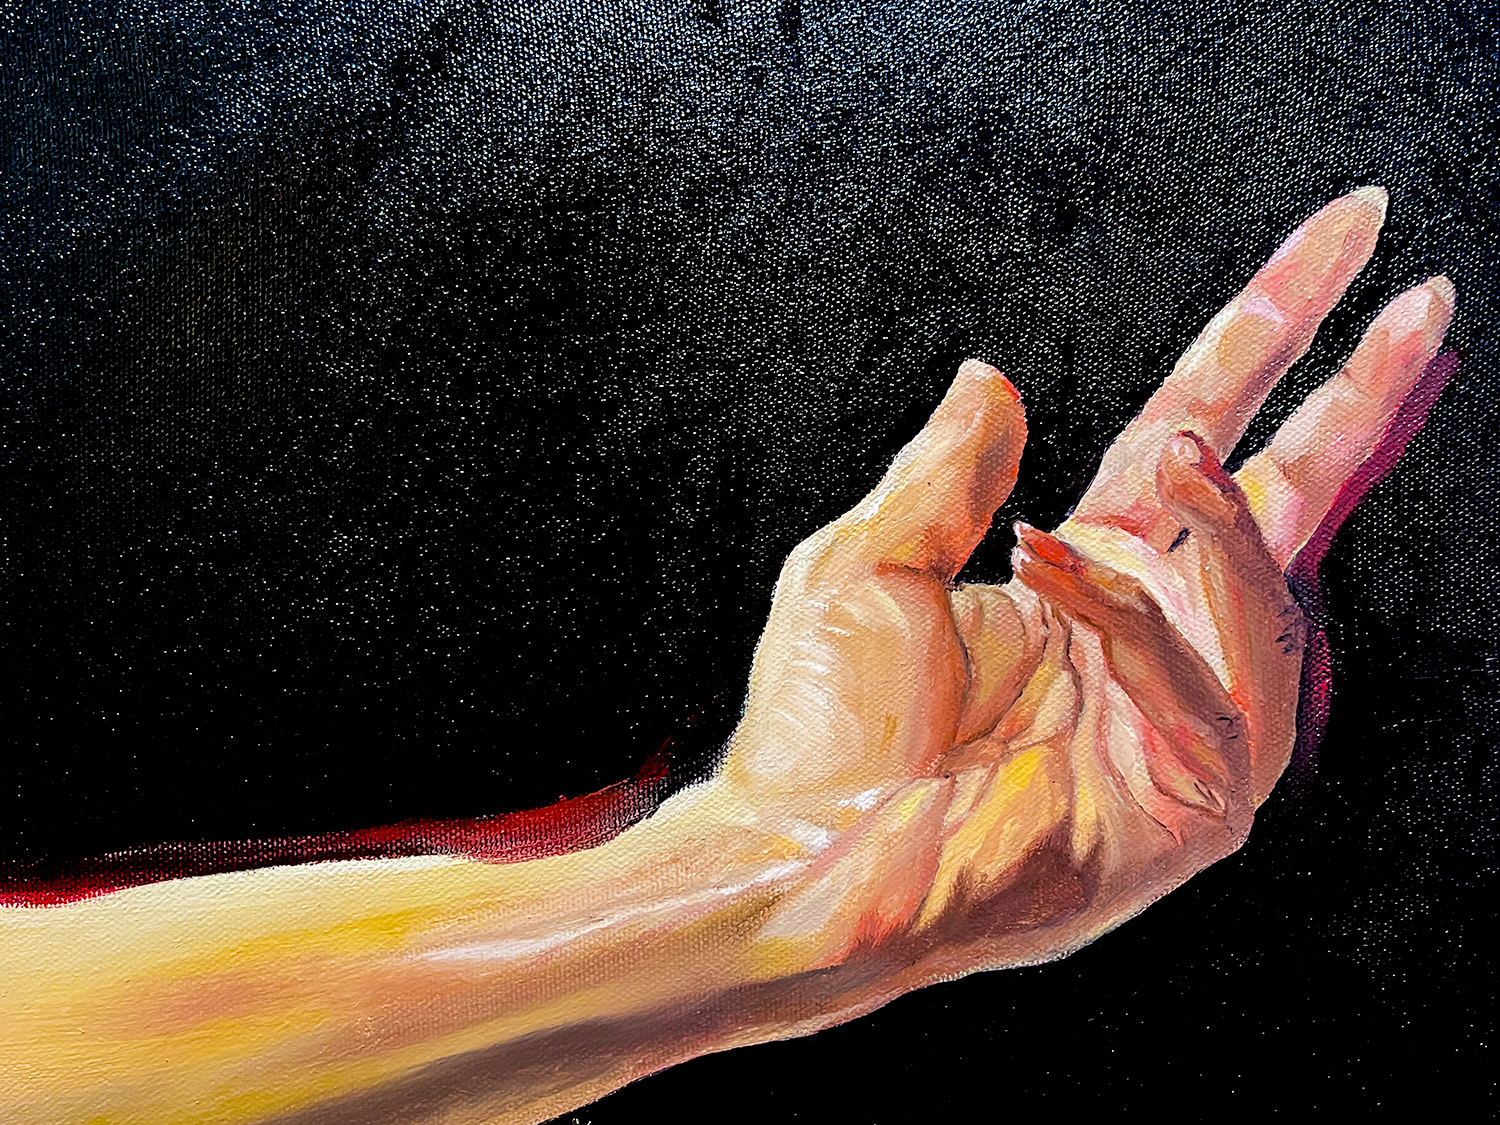 detail of painting - hand